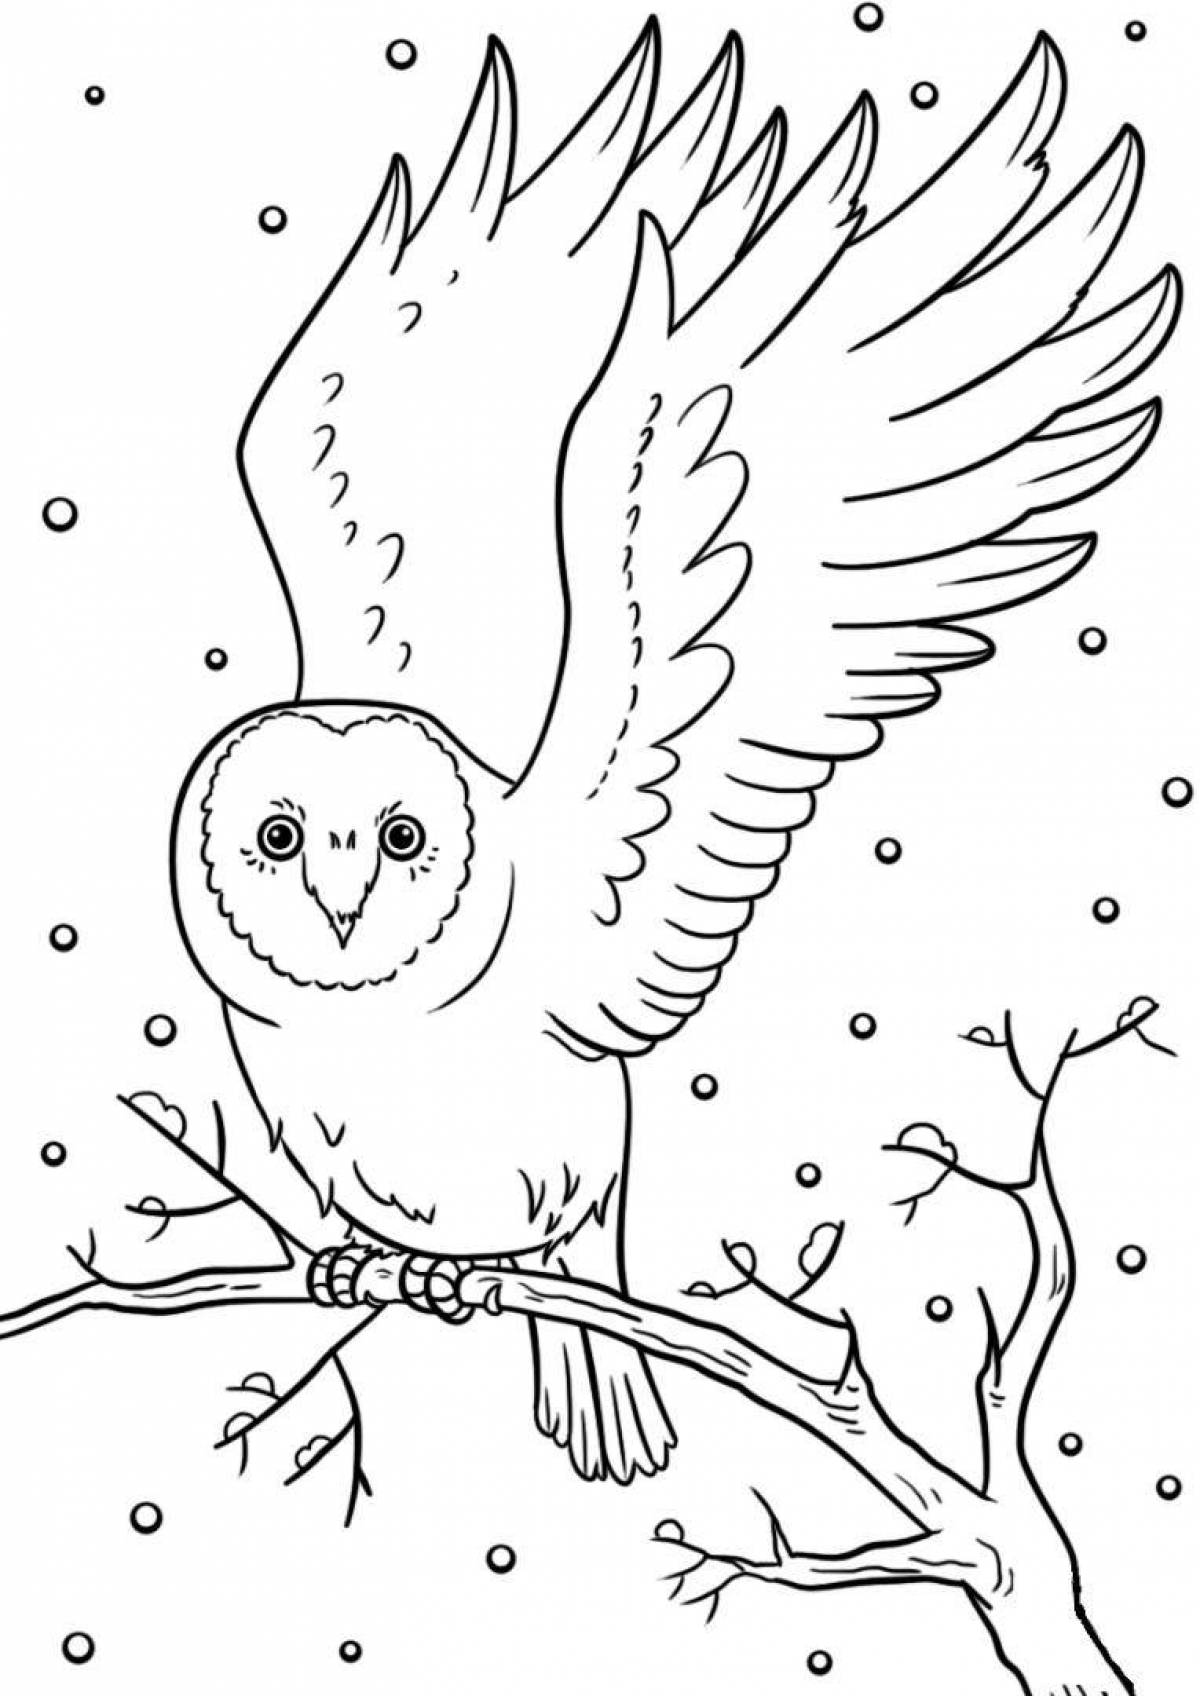 Fabulous coloring pages of wintering birds for preschoolers